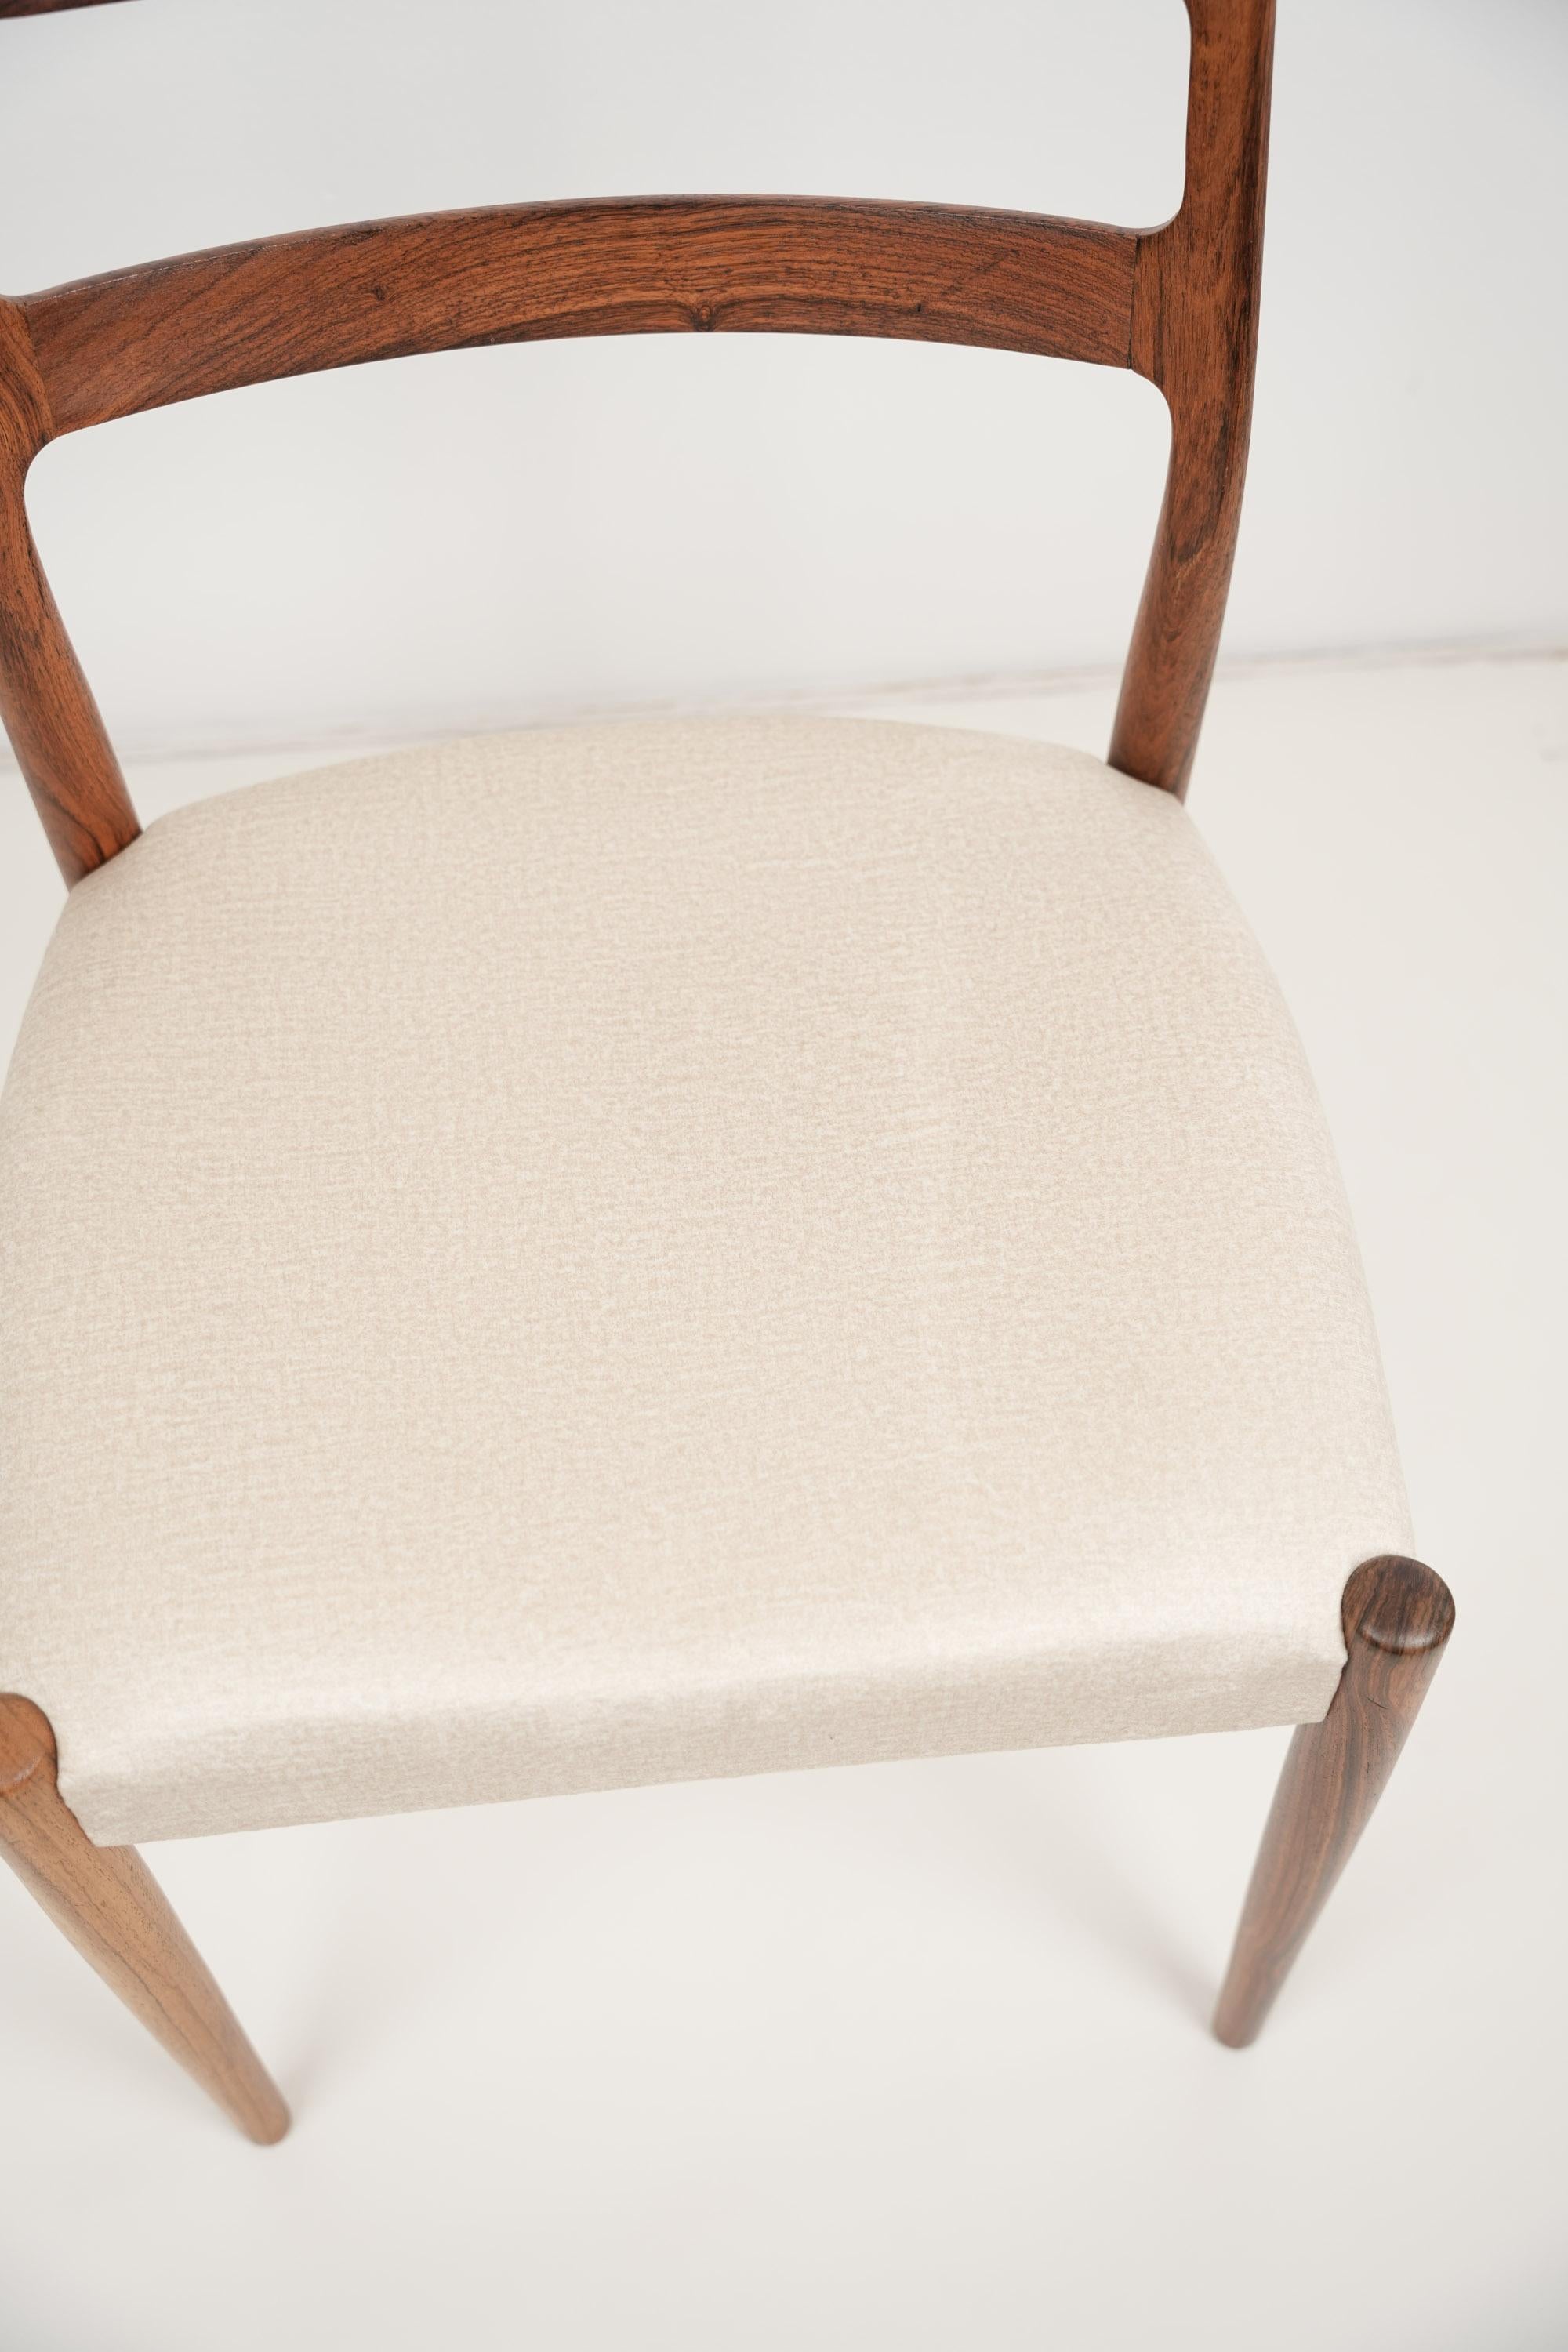 Johannes Andersen Dining Chair for Uldum 1960s In Excellent Condition For Sale In Čelinac, BA